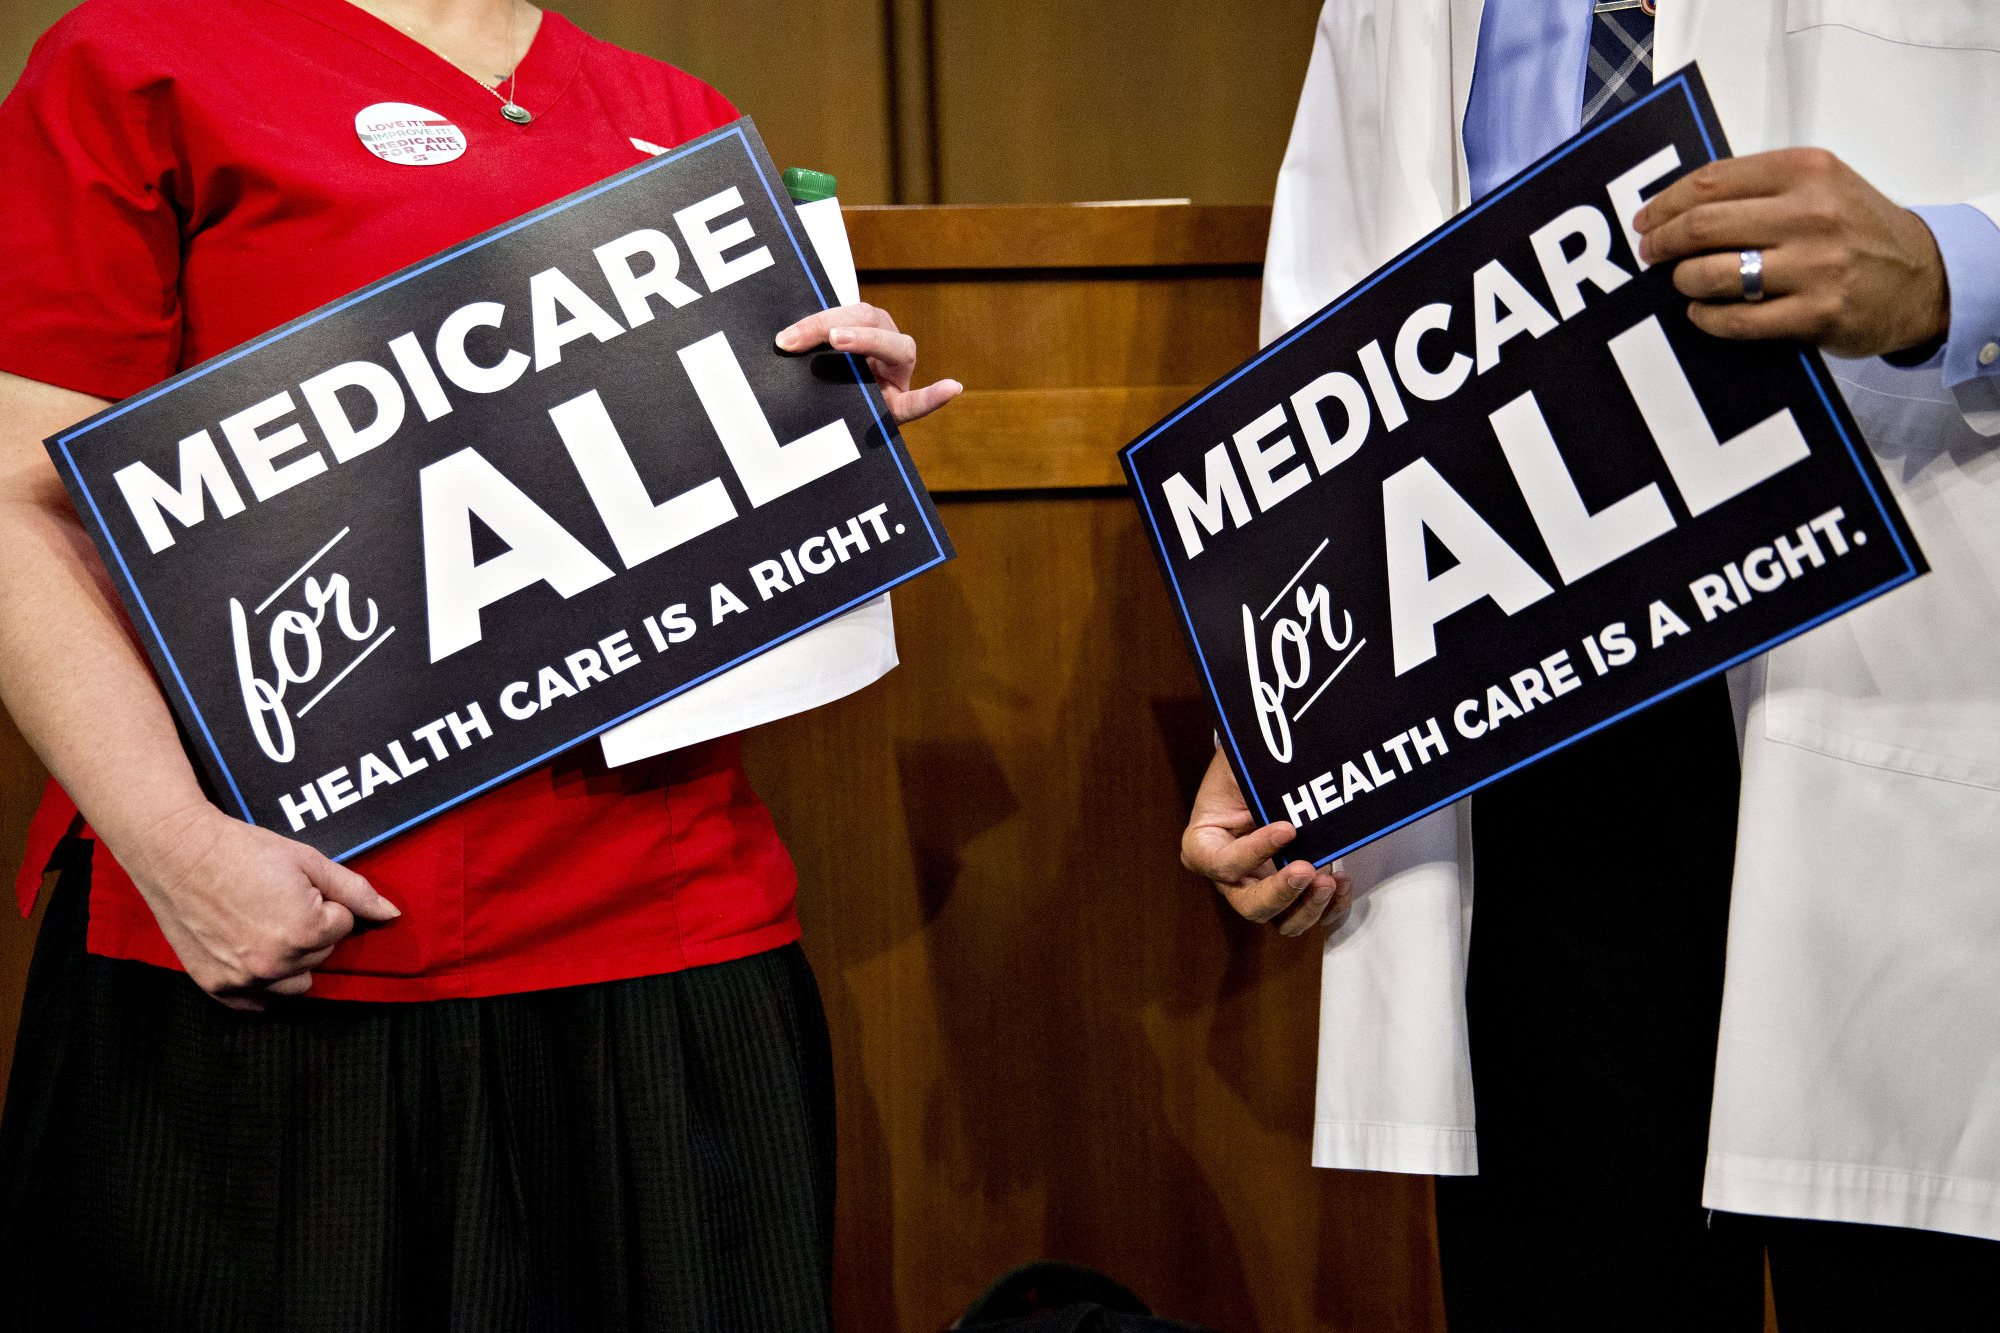 Biden&nbsp;has warned voters that Medicare for All would be expensive and hard to achieve.